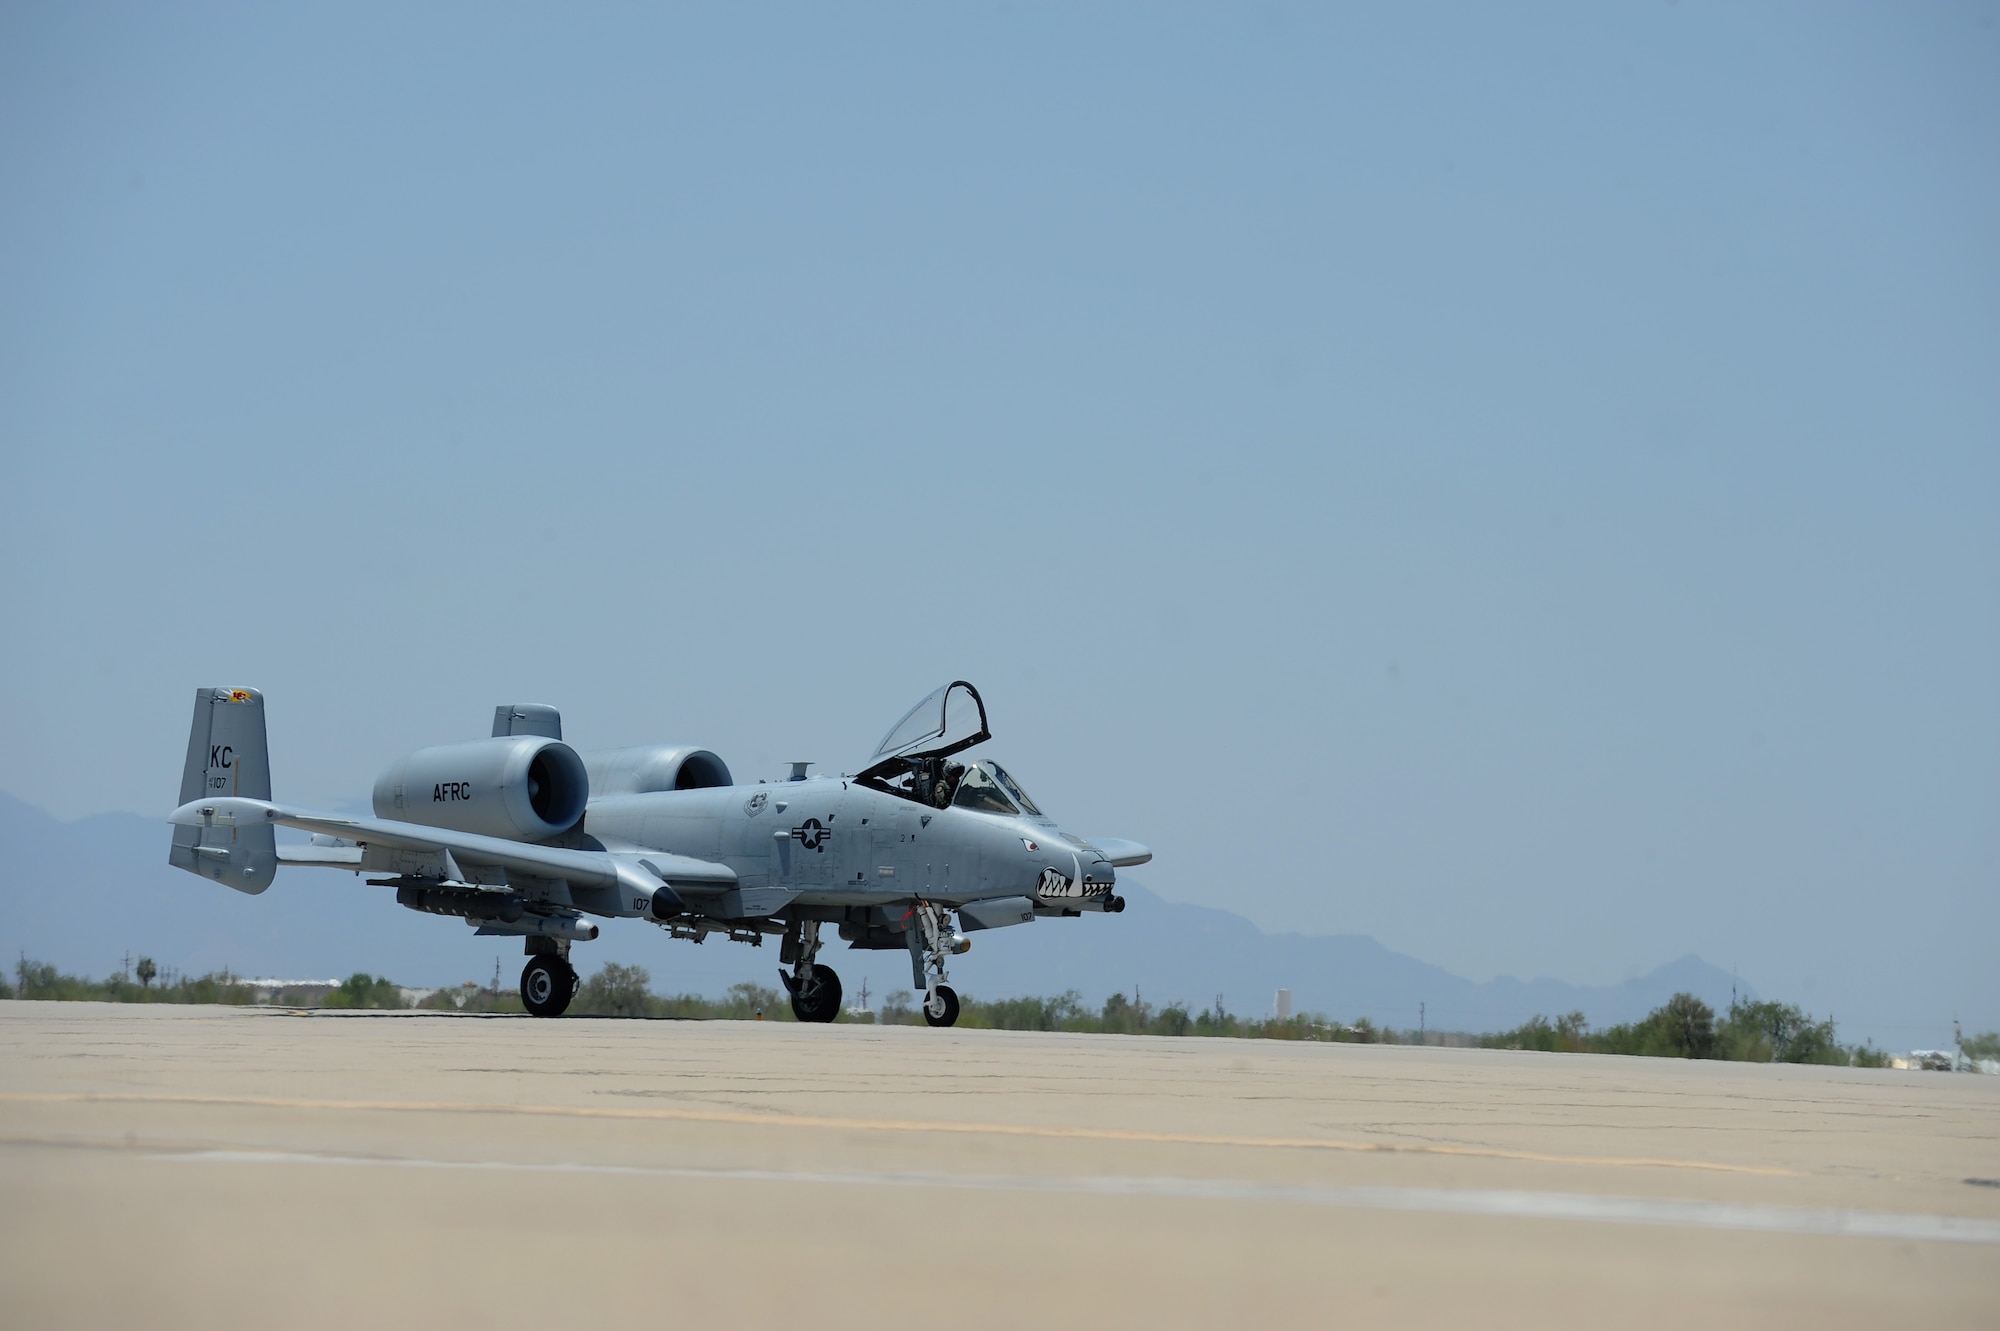 An A-10C Thunderbolt II from the 442nd Fighter Wing, Whiteman Air Force Base, Mo., lands at Davis-Monthan Air Force Base, Ariz., June 2, 2016. A-10s traveled to the Barry M. Goldwater Range to compete in the 2016 Hawgsmoke competition. (U.S. Air Force photo by Airman 1st Class Ashley N. Steffen/Released)